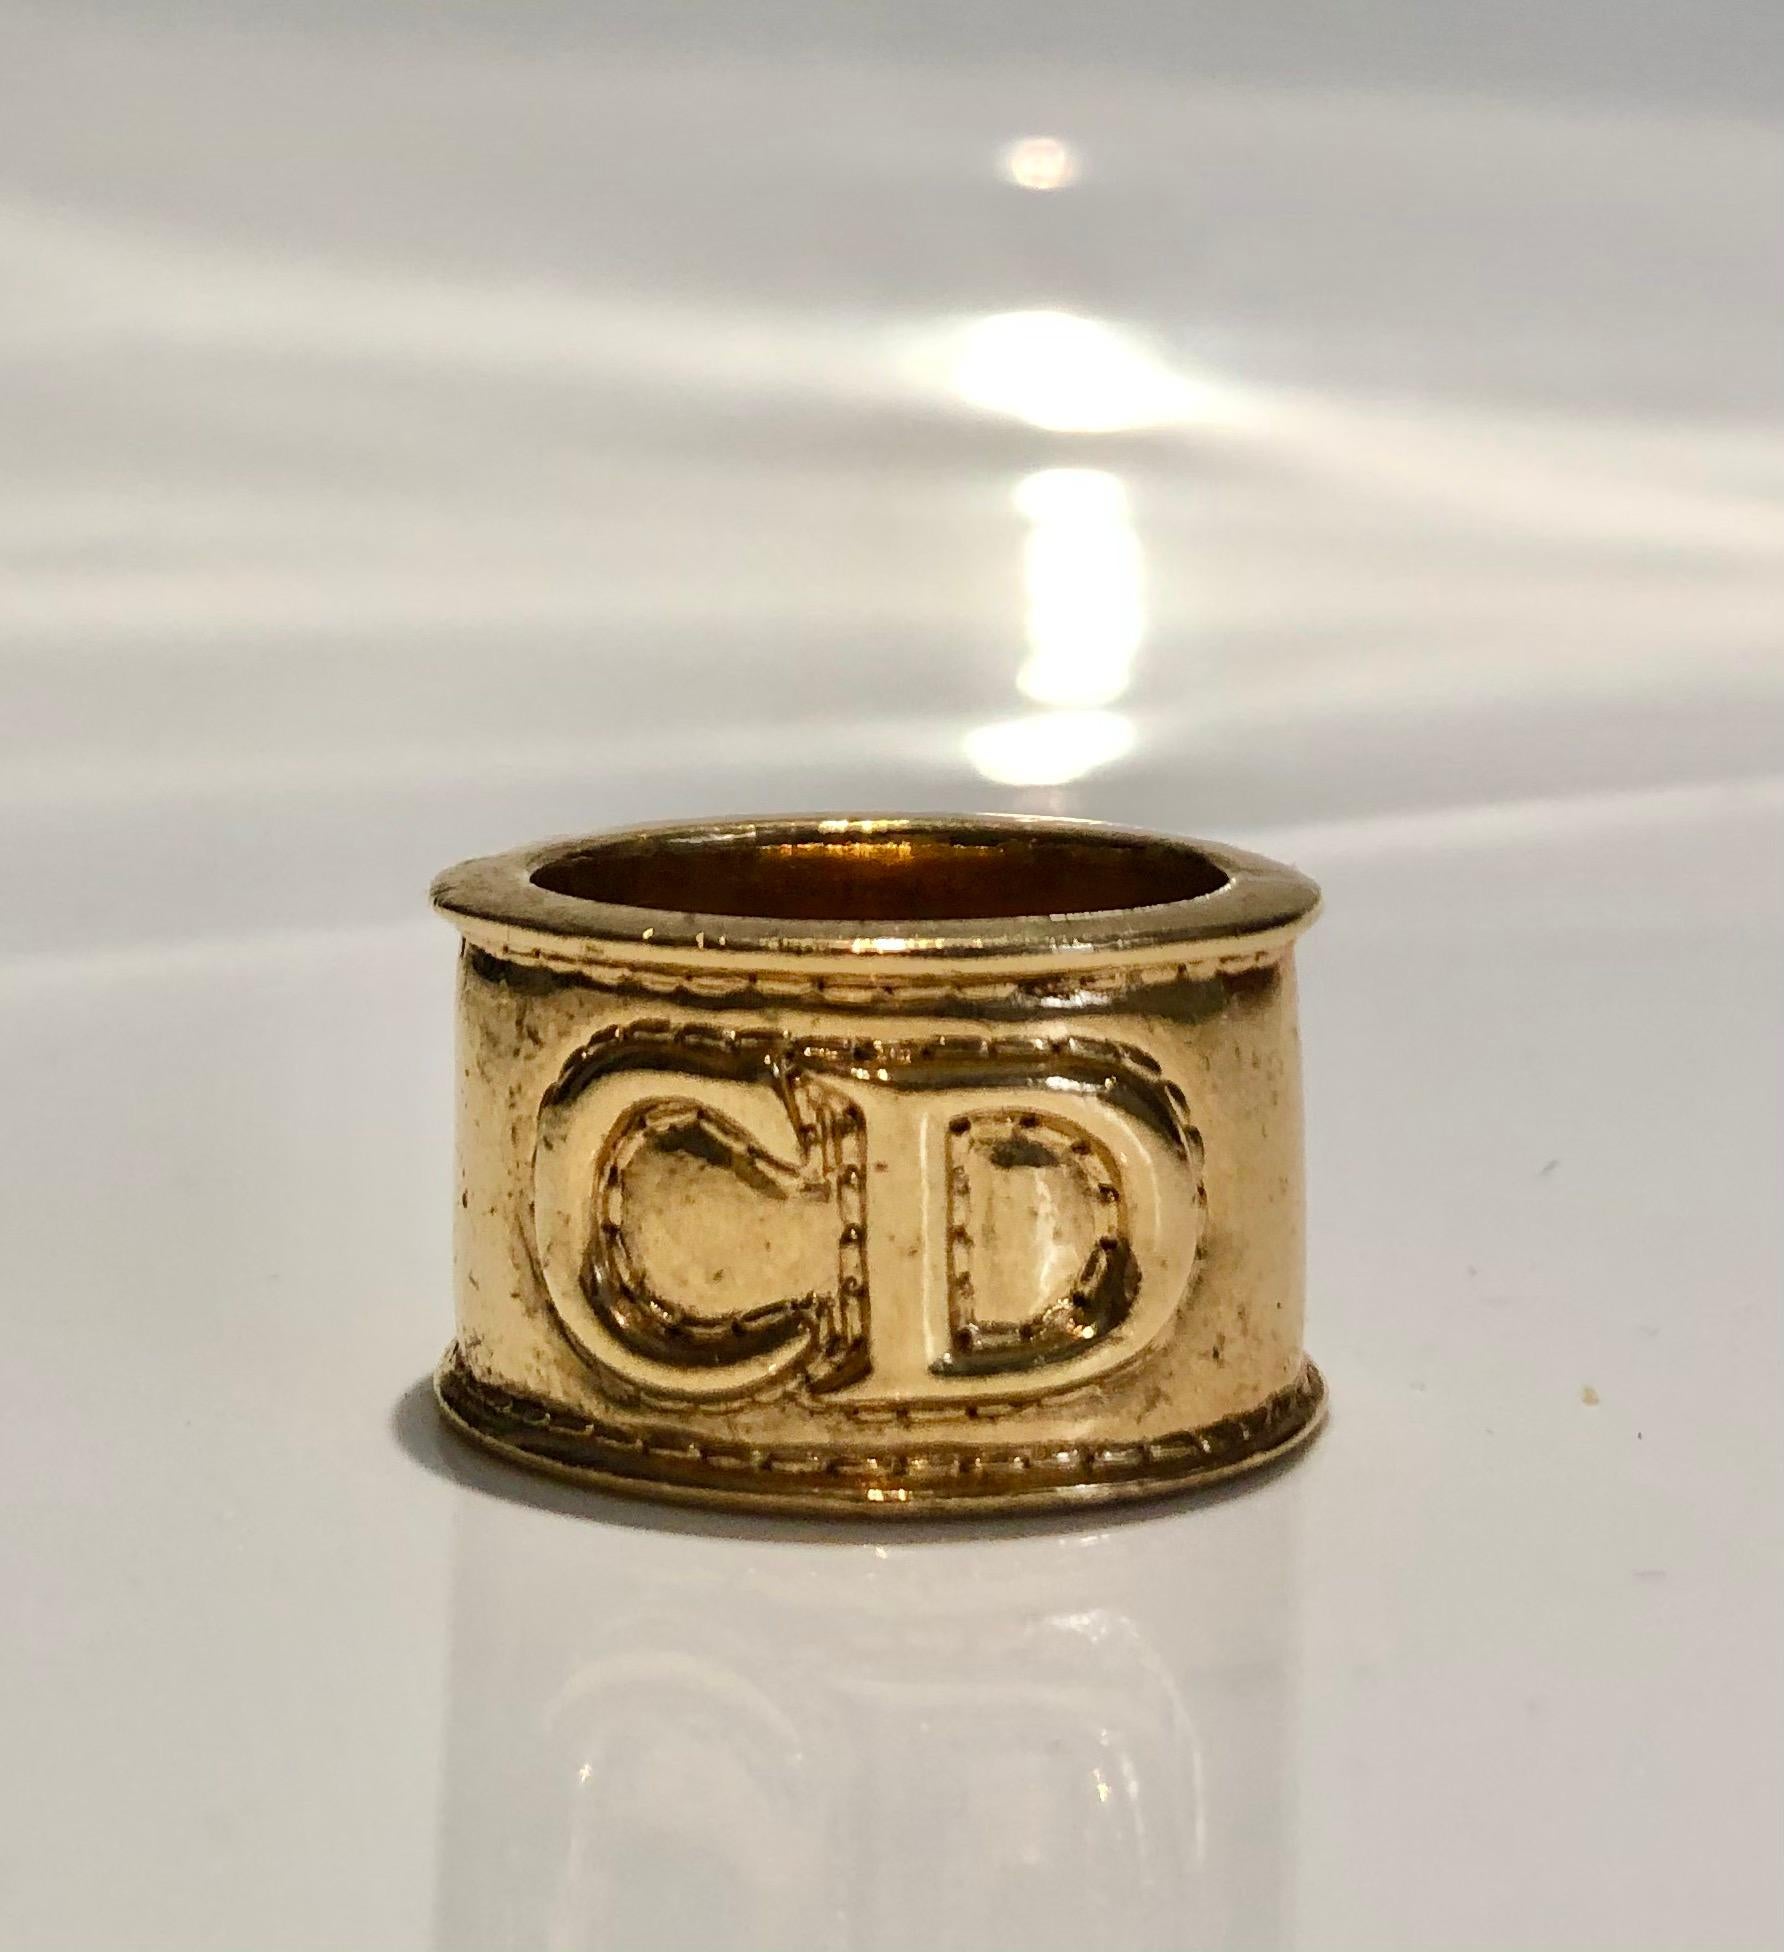 Christian Dior Gold Tone Metal Scarf Ring, CD front logo engraved logo in the inside 

Condition: 1980s vintage piece, very good state 
Dimensions: 3x3.5cm